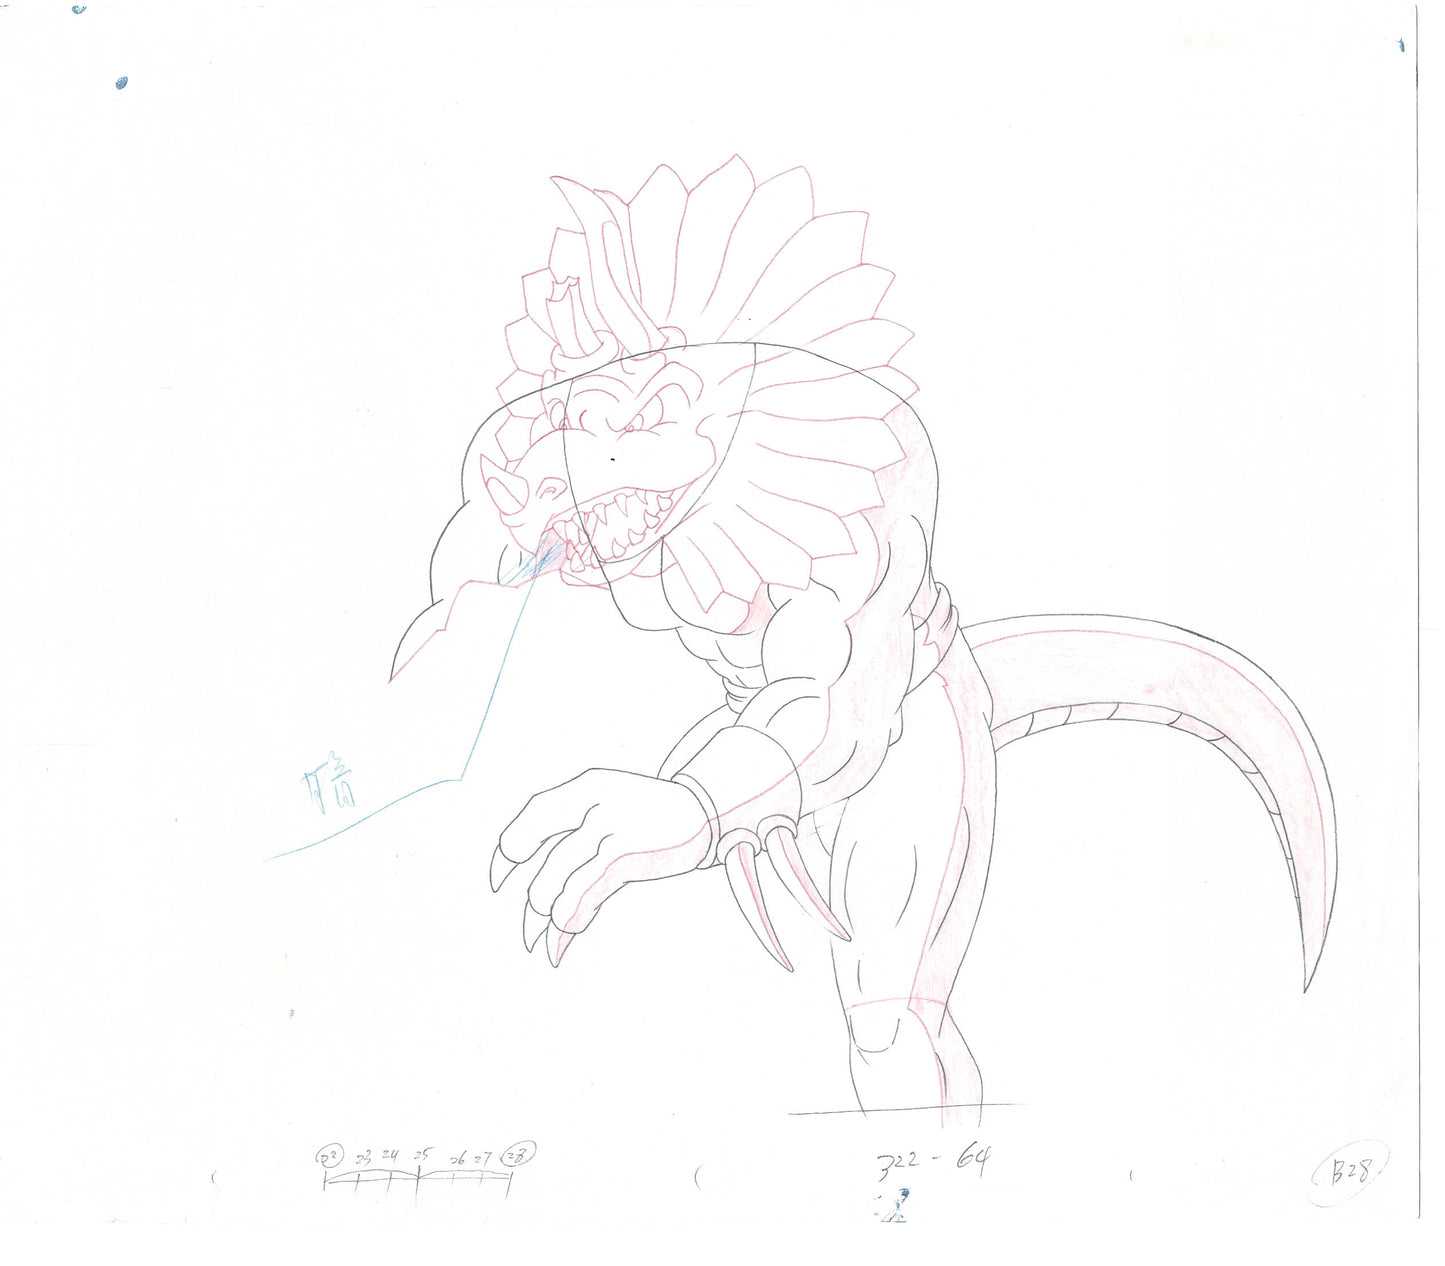 Street Sharks DIC Production Animation Cel Drawing 1994-1997 C-30